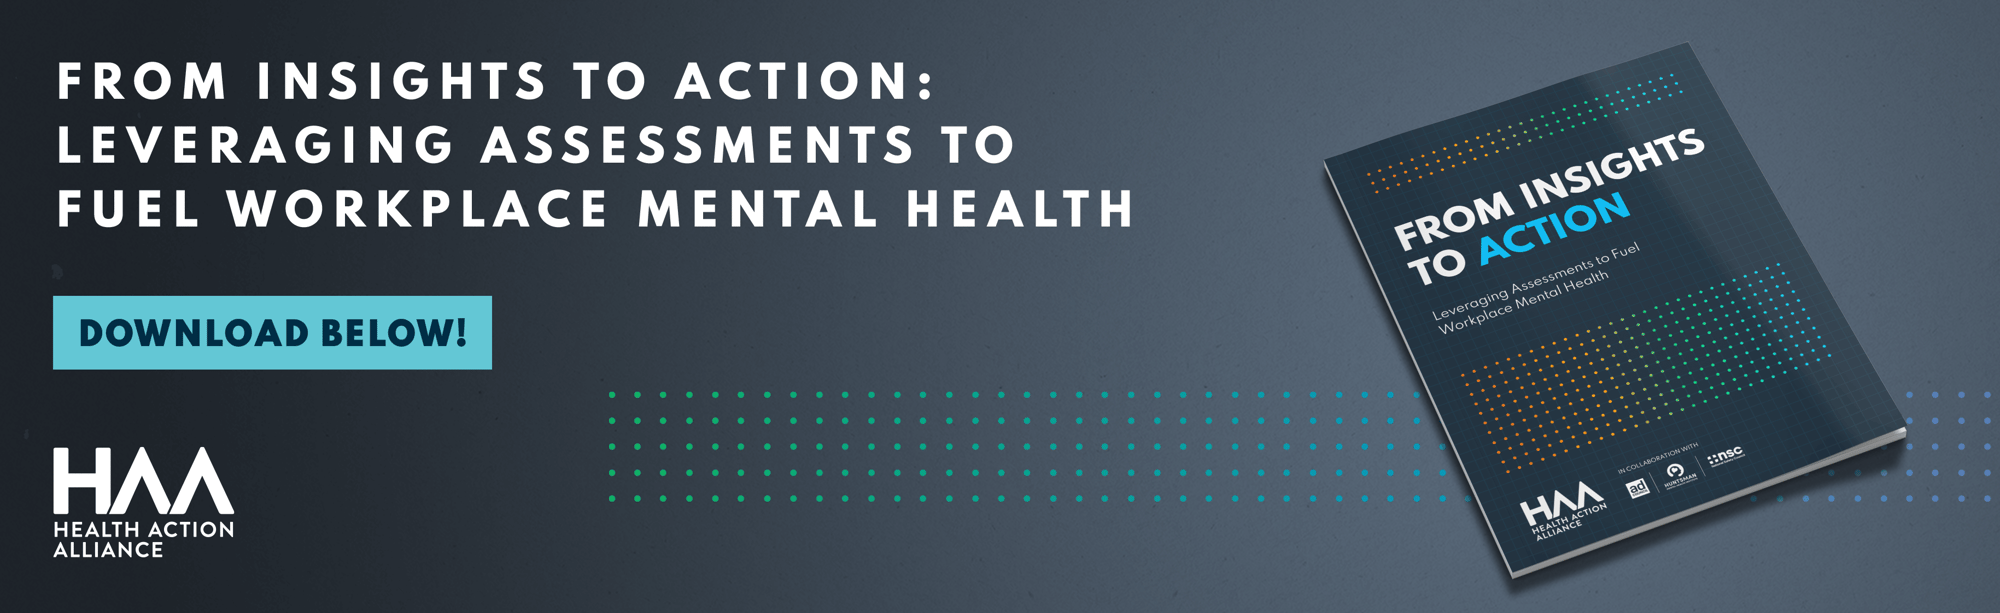 Leveraging Assessments to Fuel Workplace Mental Health Banner